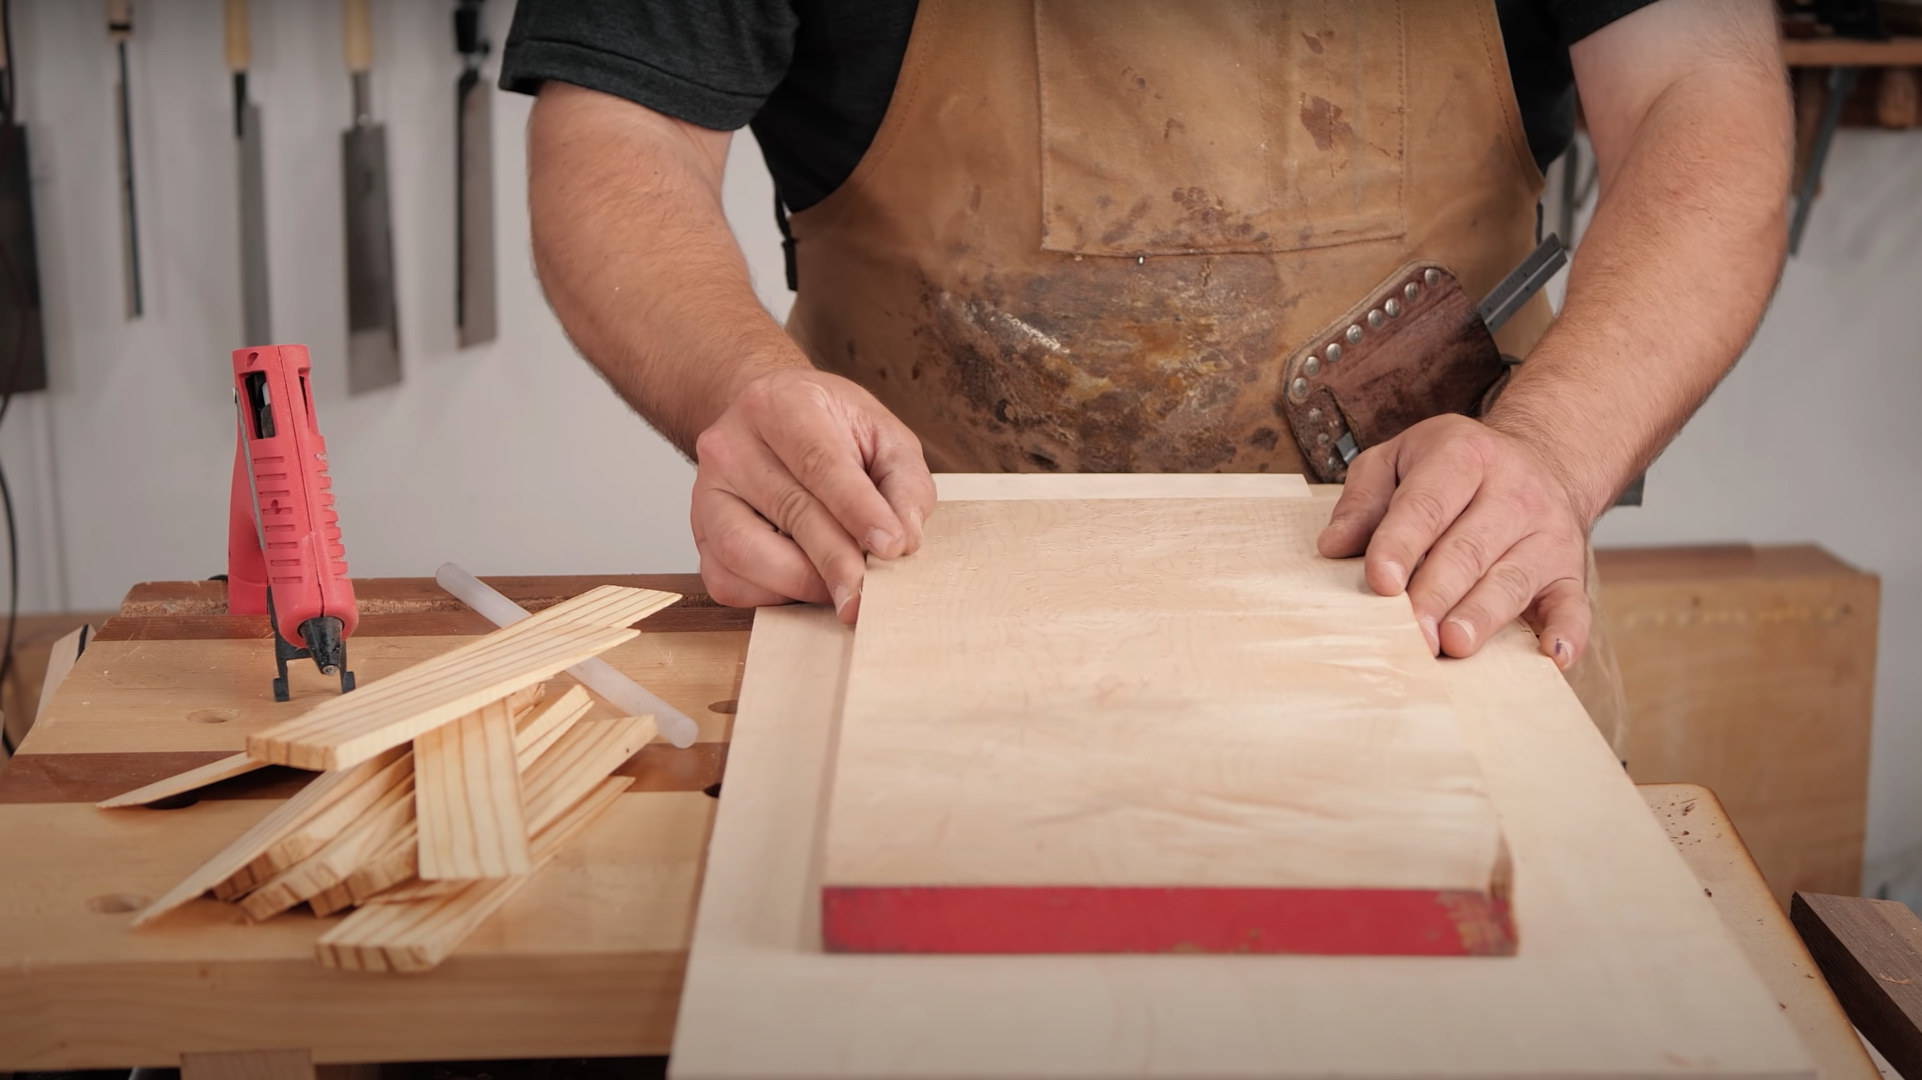 Placing a board on a planer jointing jig